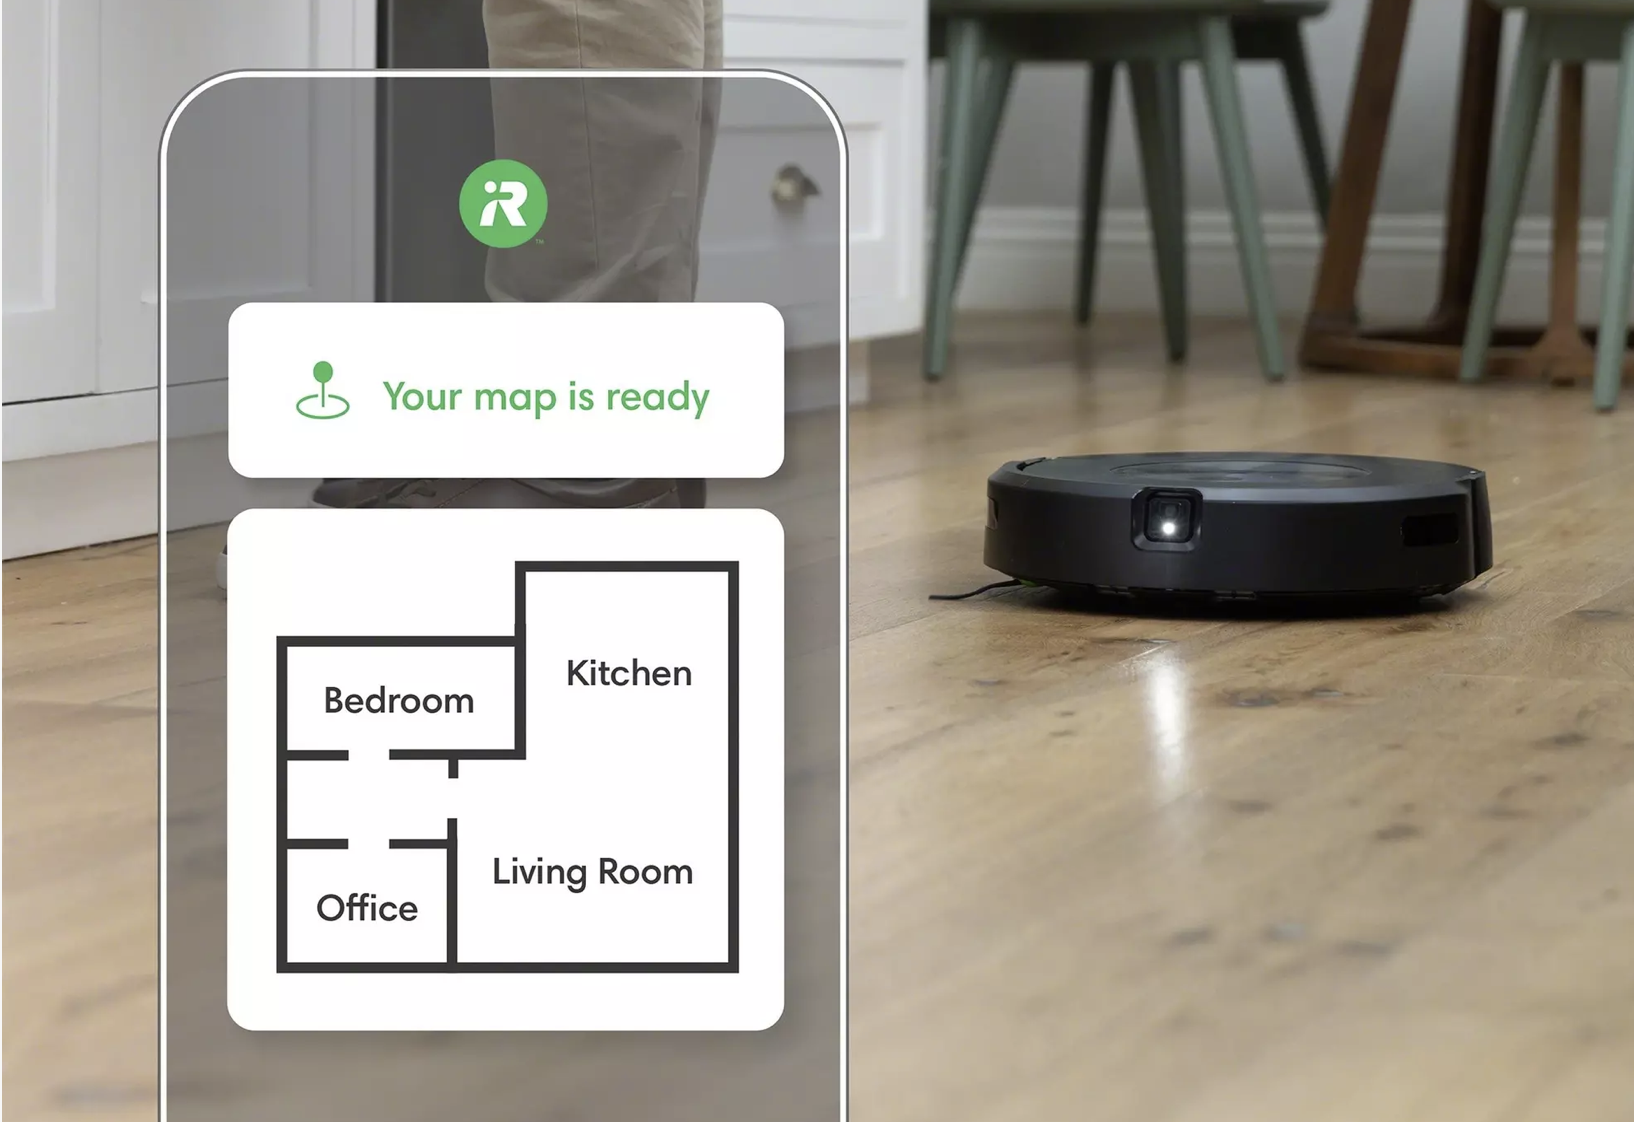 The iRobot app on your phone shows you the map of your space